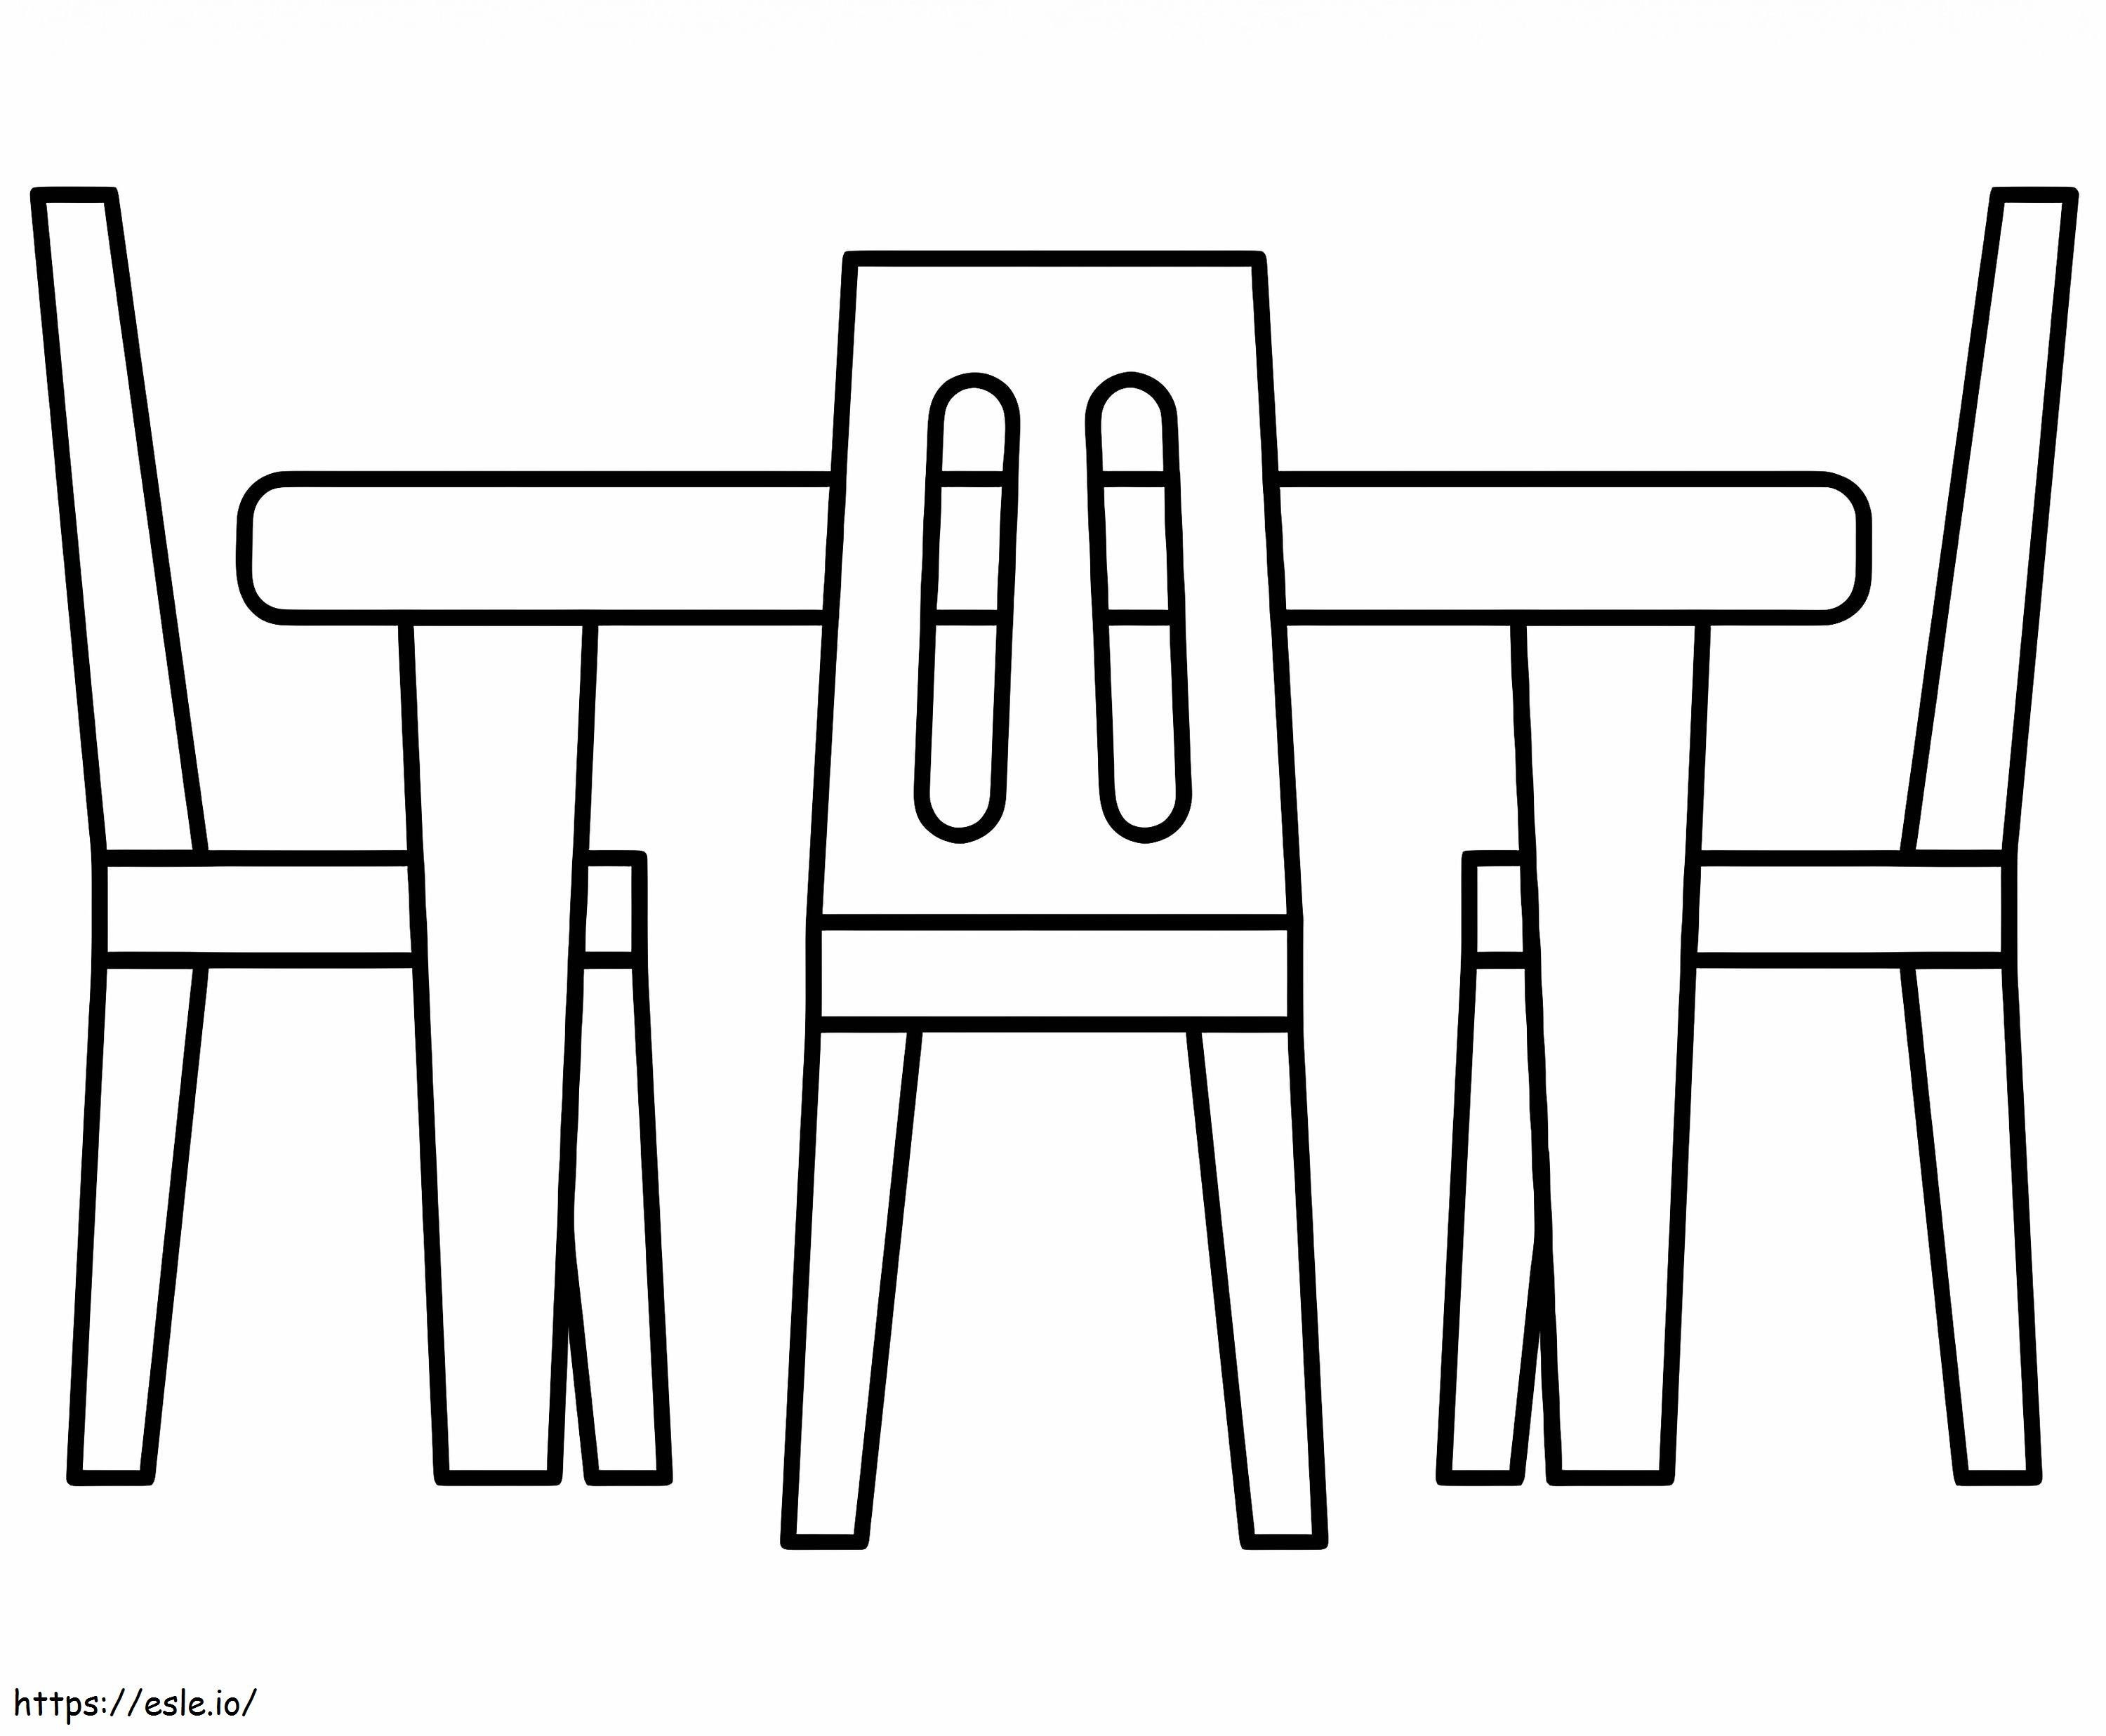 Easy Dining Table coloring page